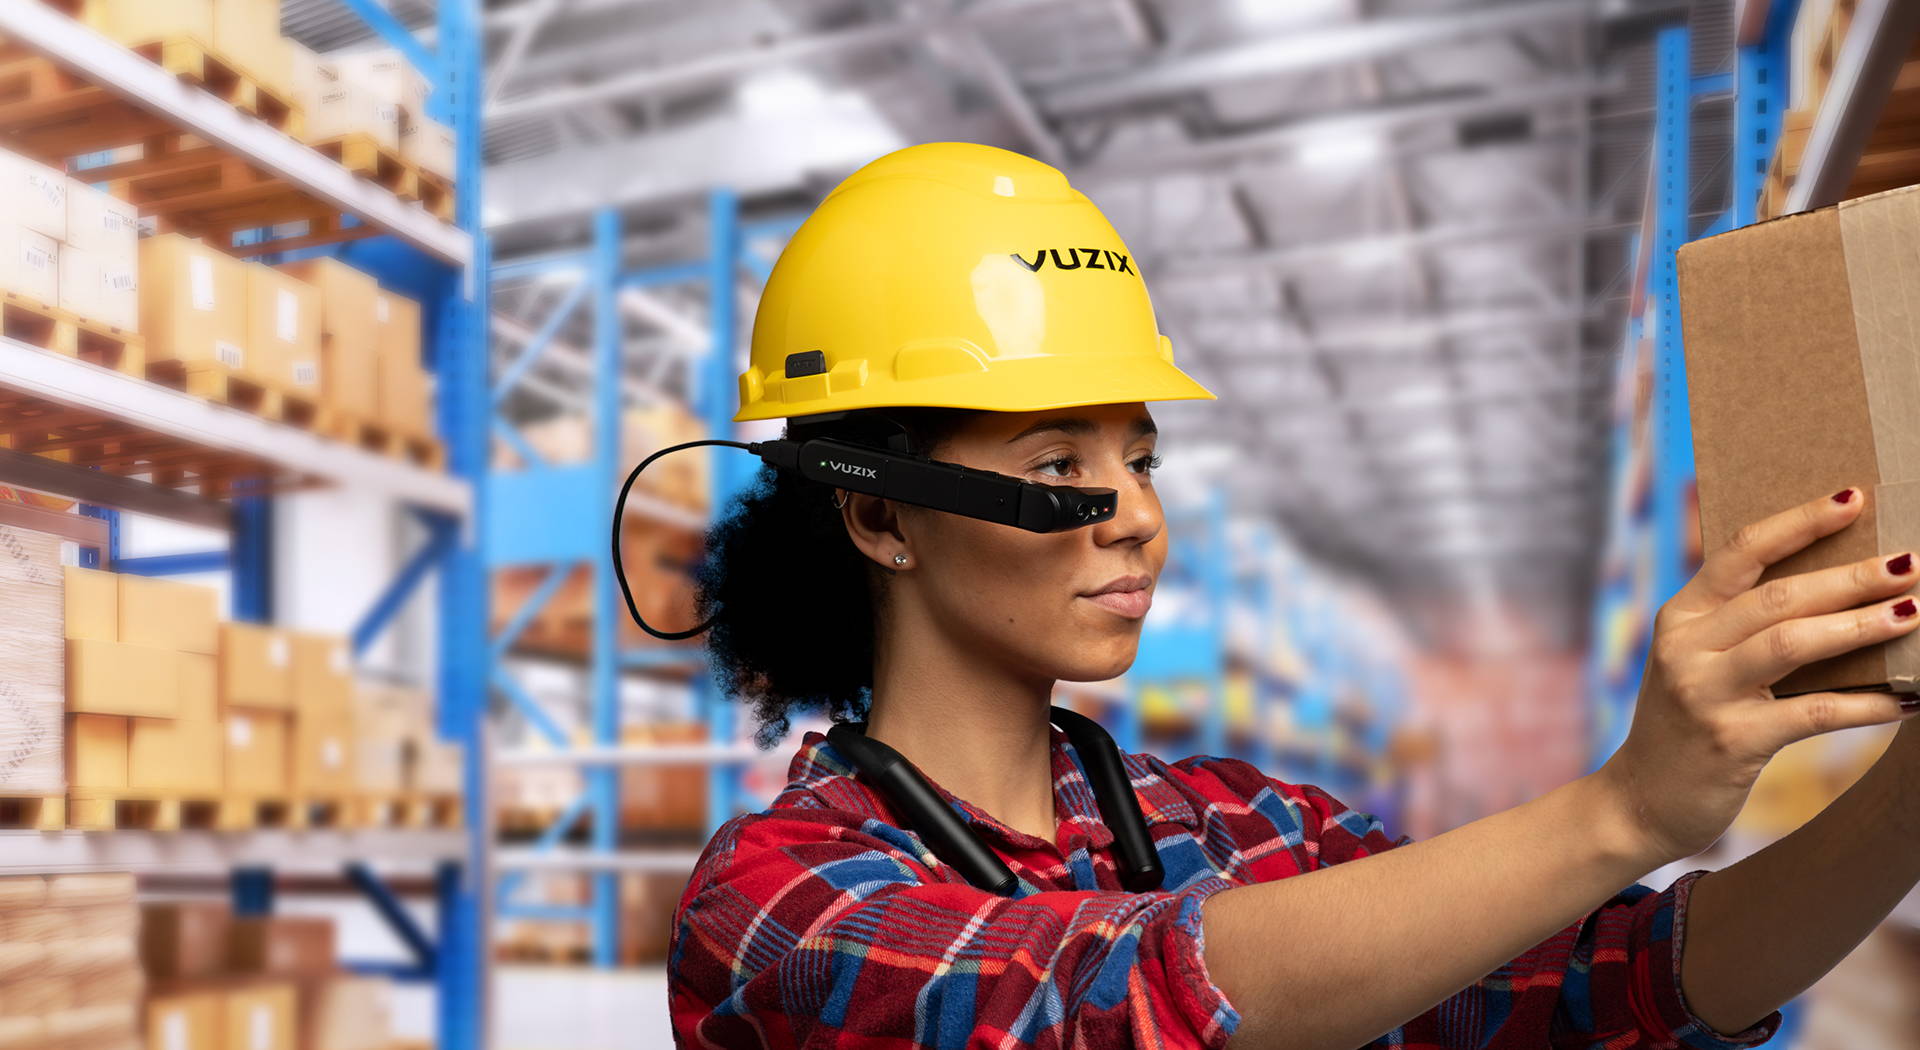 Young woman in red-and-blue checked top, wearing Vuzix smart glasses on a yellow hard hat scanning a box in a warehouse.